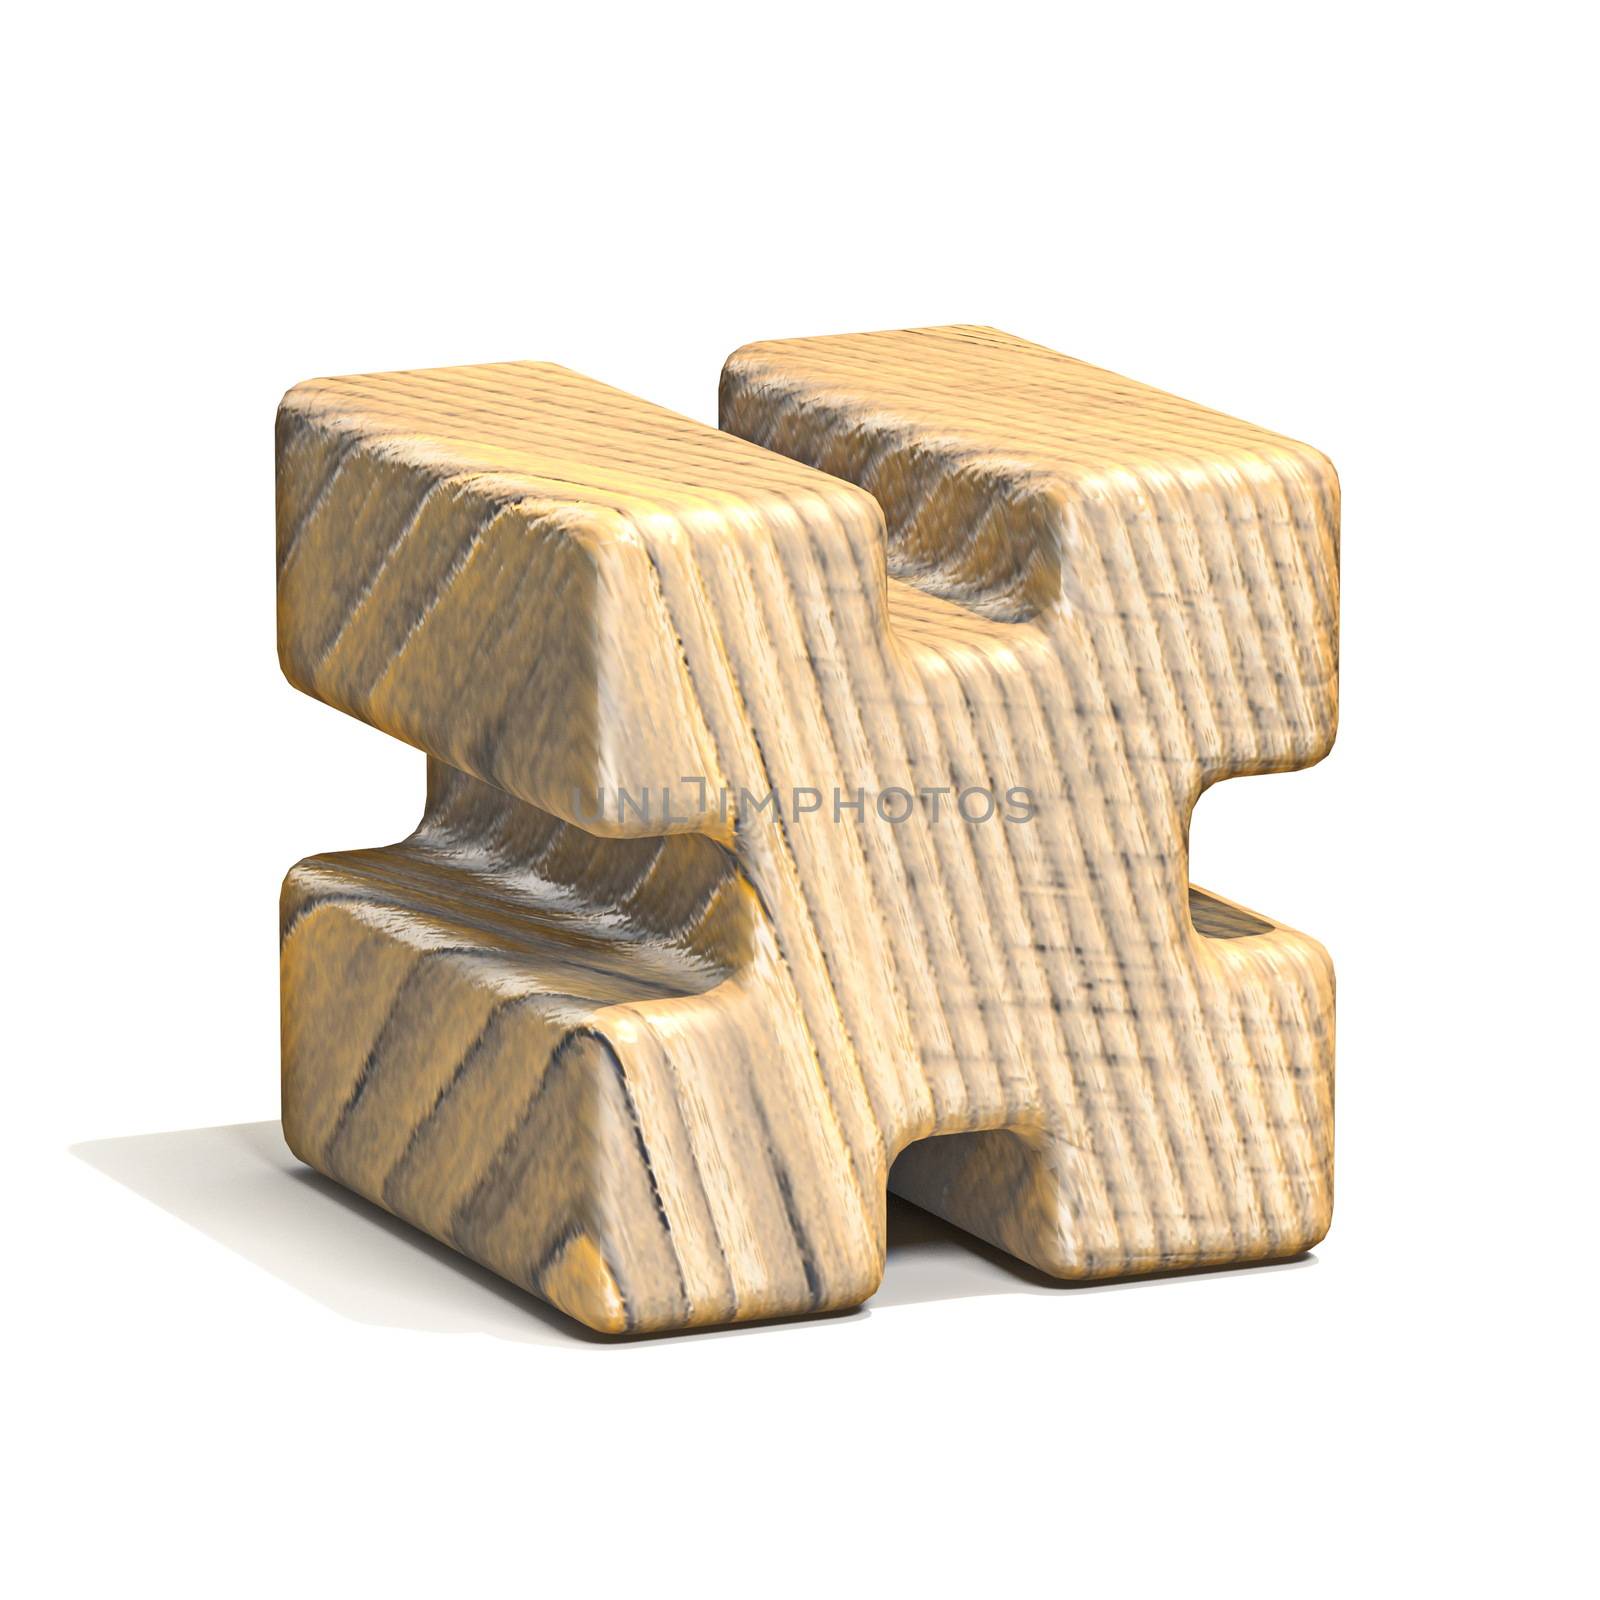 Solid wooden cube font Letter X 3D render illustration isolated on white background